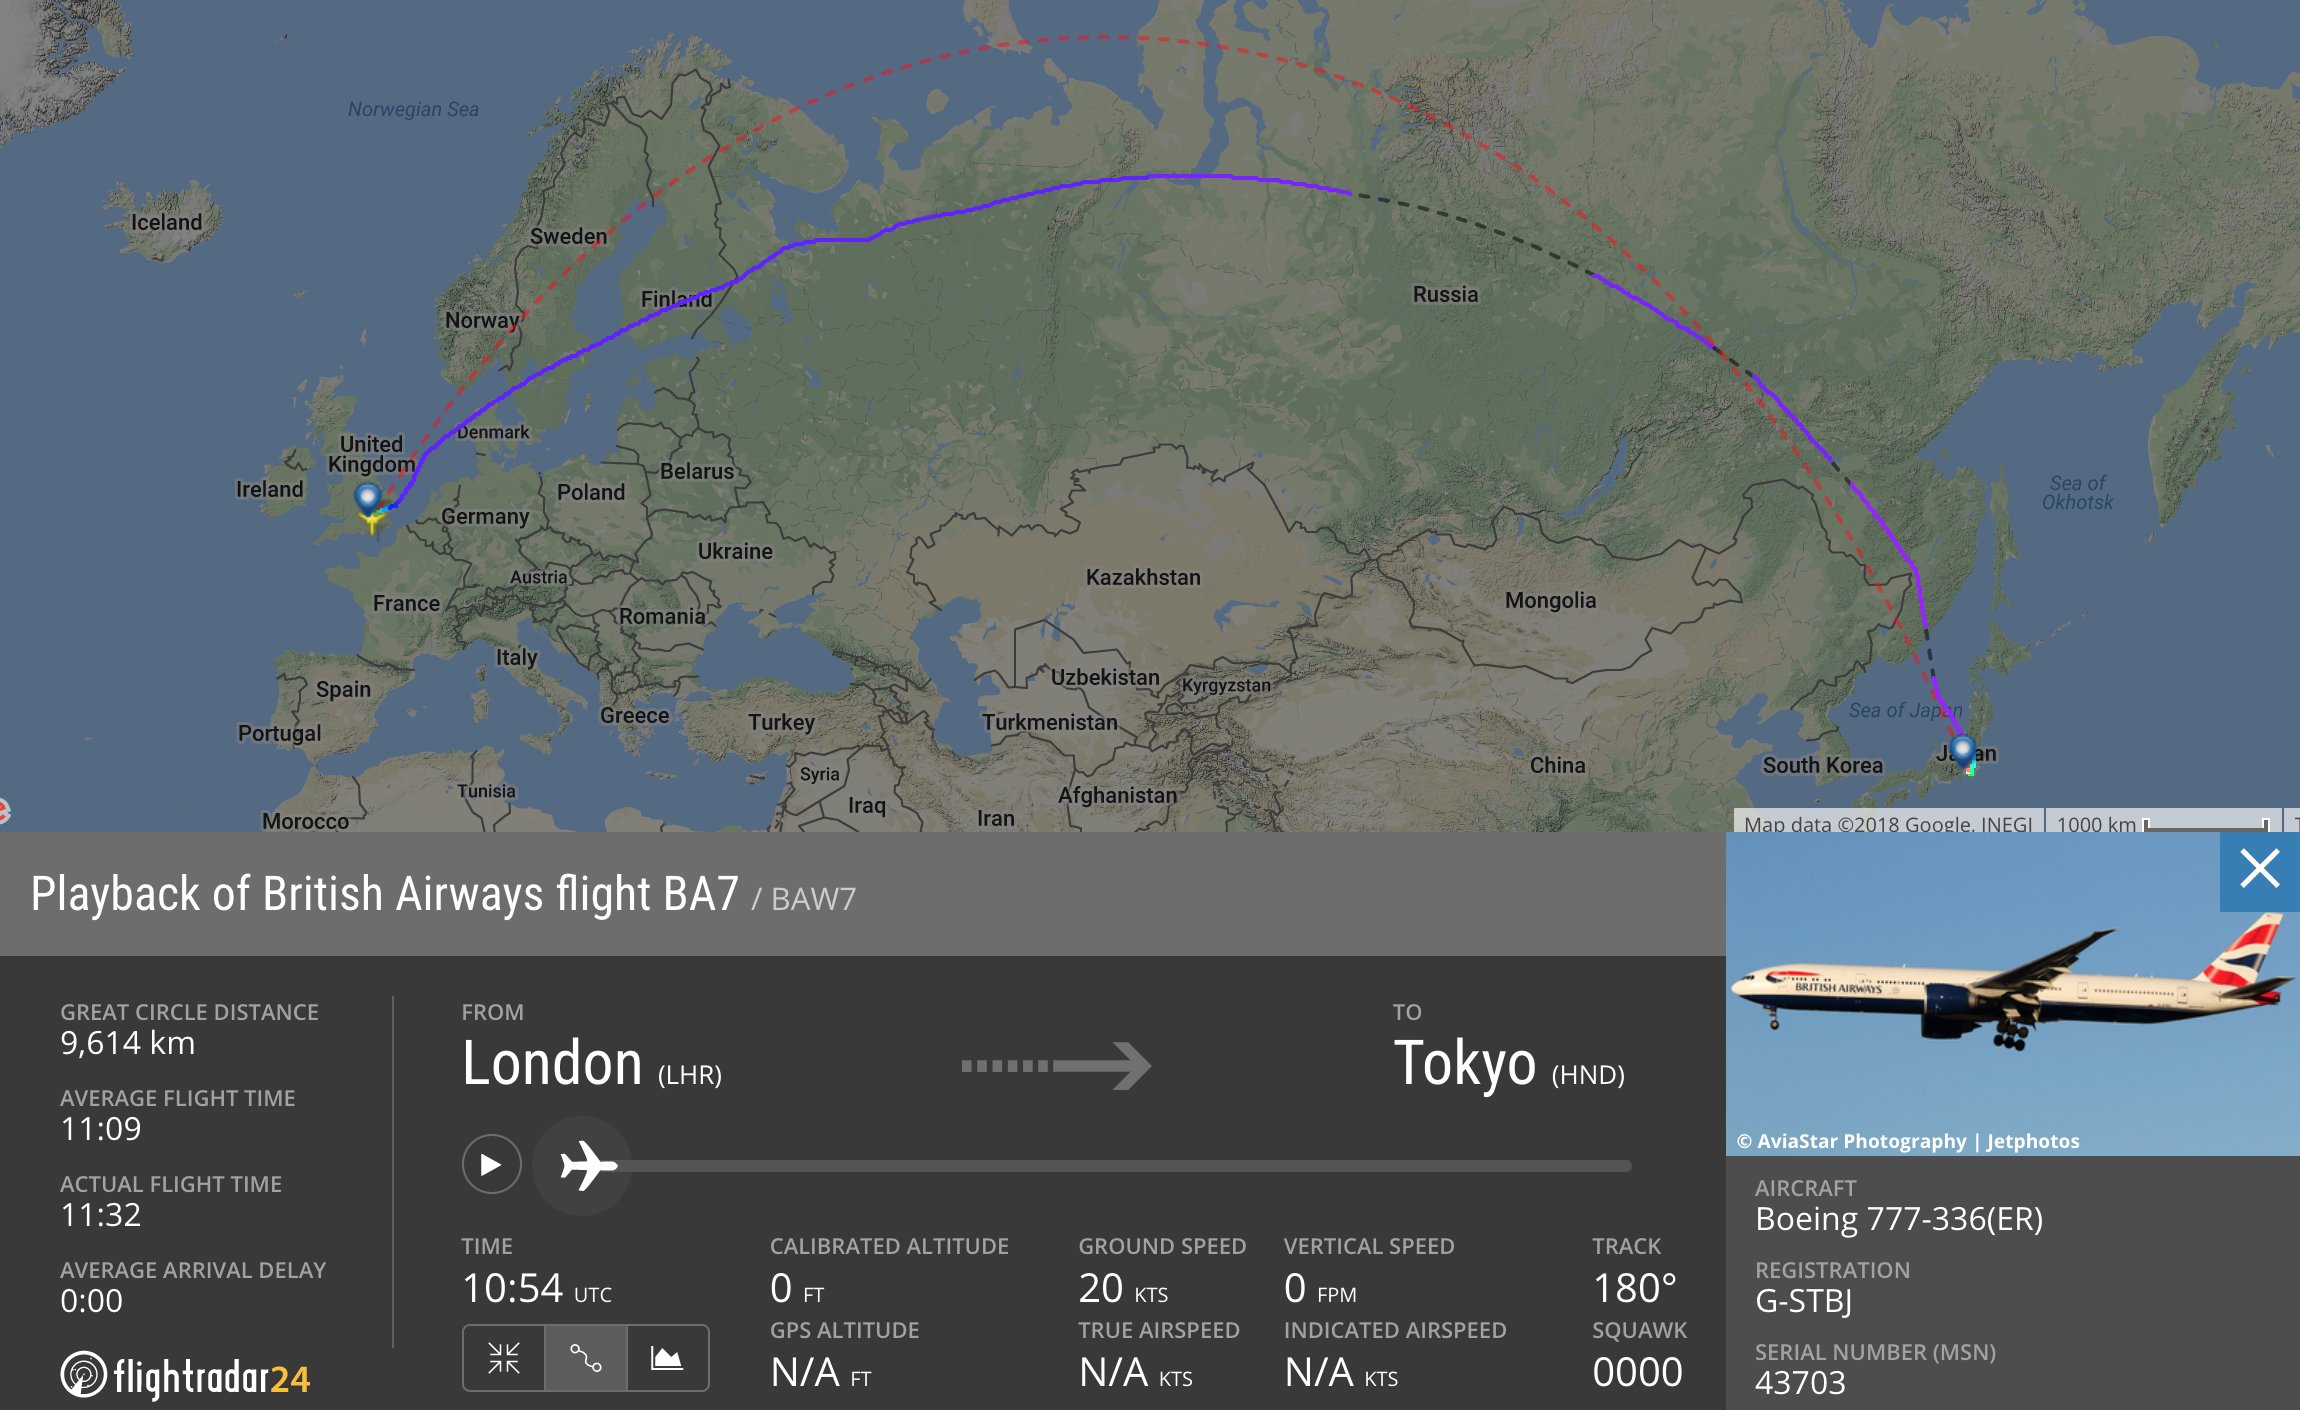 Flightradar24 on Twitter: "For comparison, here's yesterday's #BA7 from London to Tokyo, with the great route shown (dashed red line). https://t.co/D8ilv8f3h6 https://t.co/rmTpGPfNuK" / Twitter